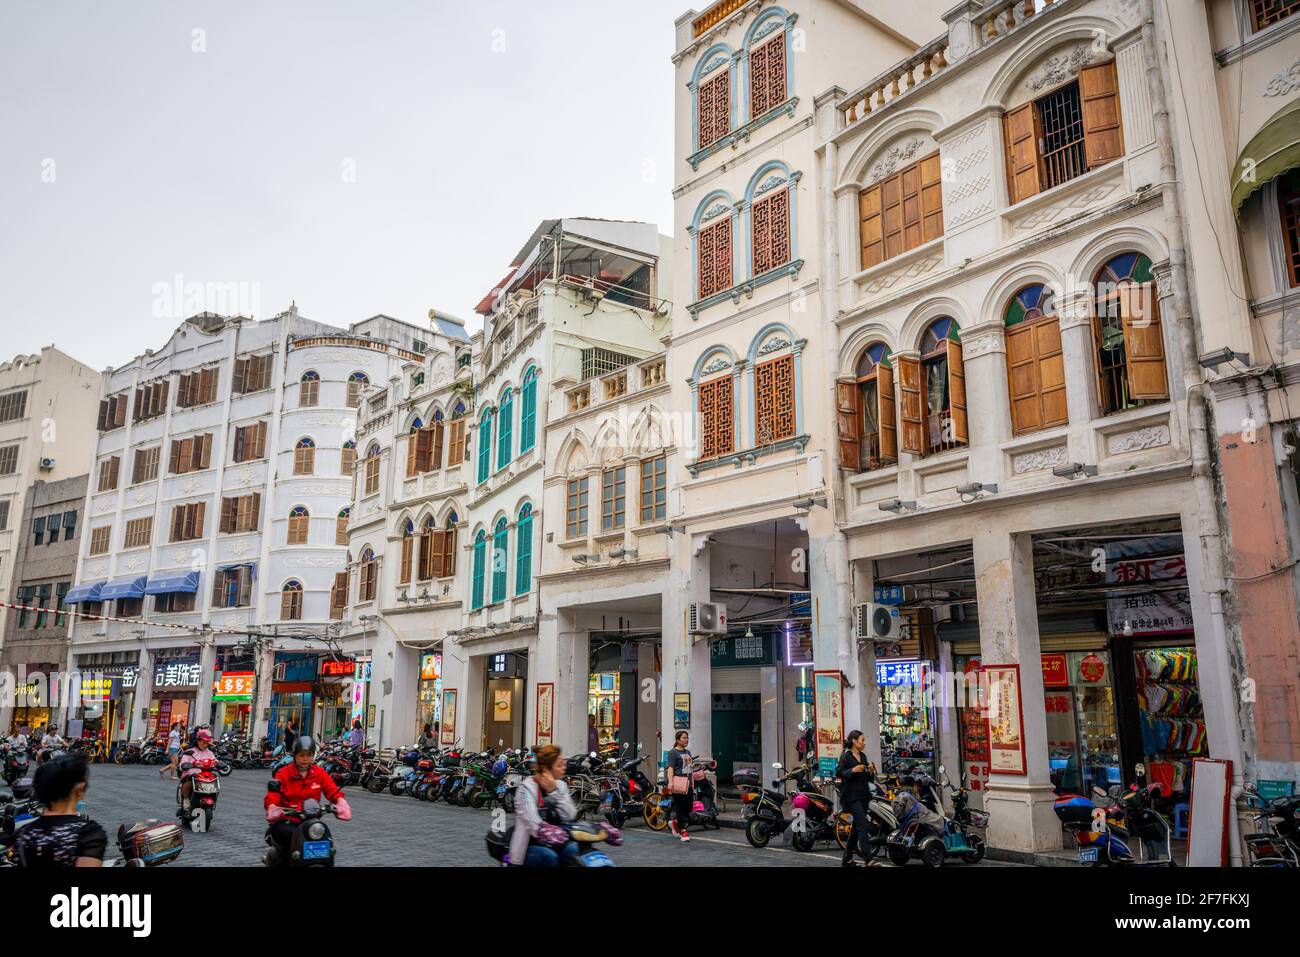 Haikou China , 21 March 2021 : Street view of Xinhua north road with many colorful old colonial buildings in Haikou Qilou old town Hainan China Stock Photo